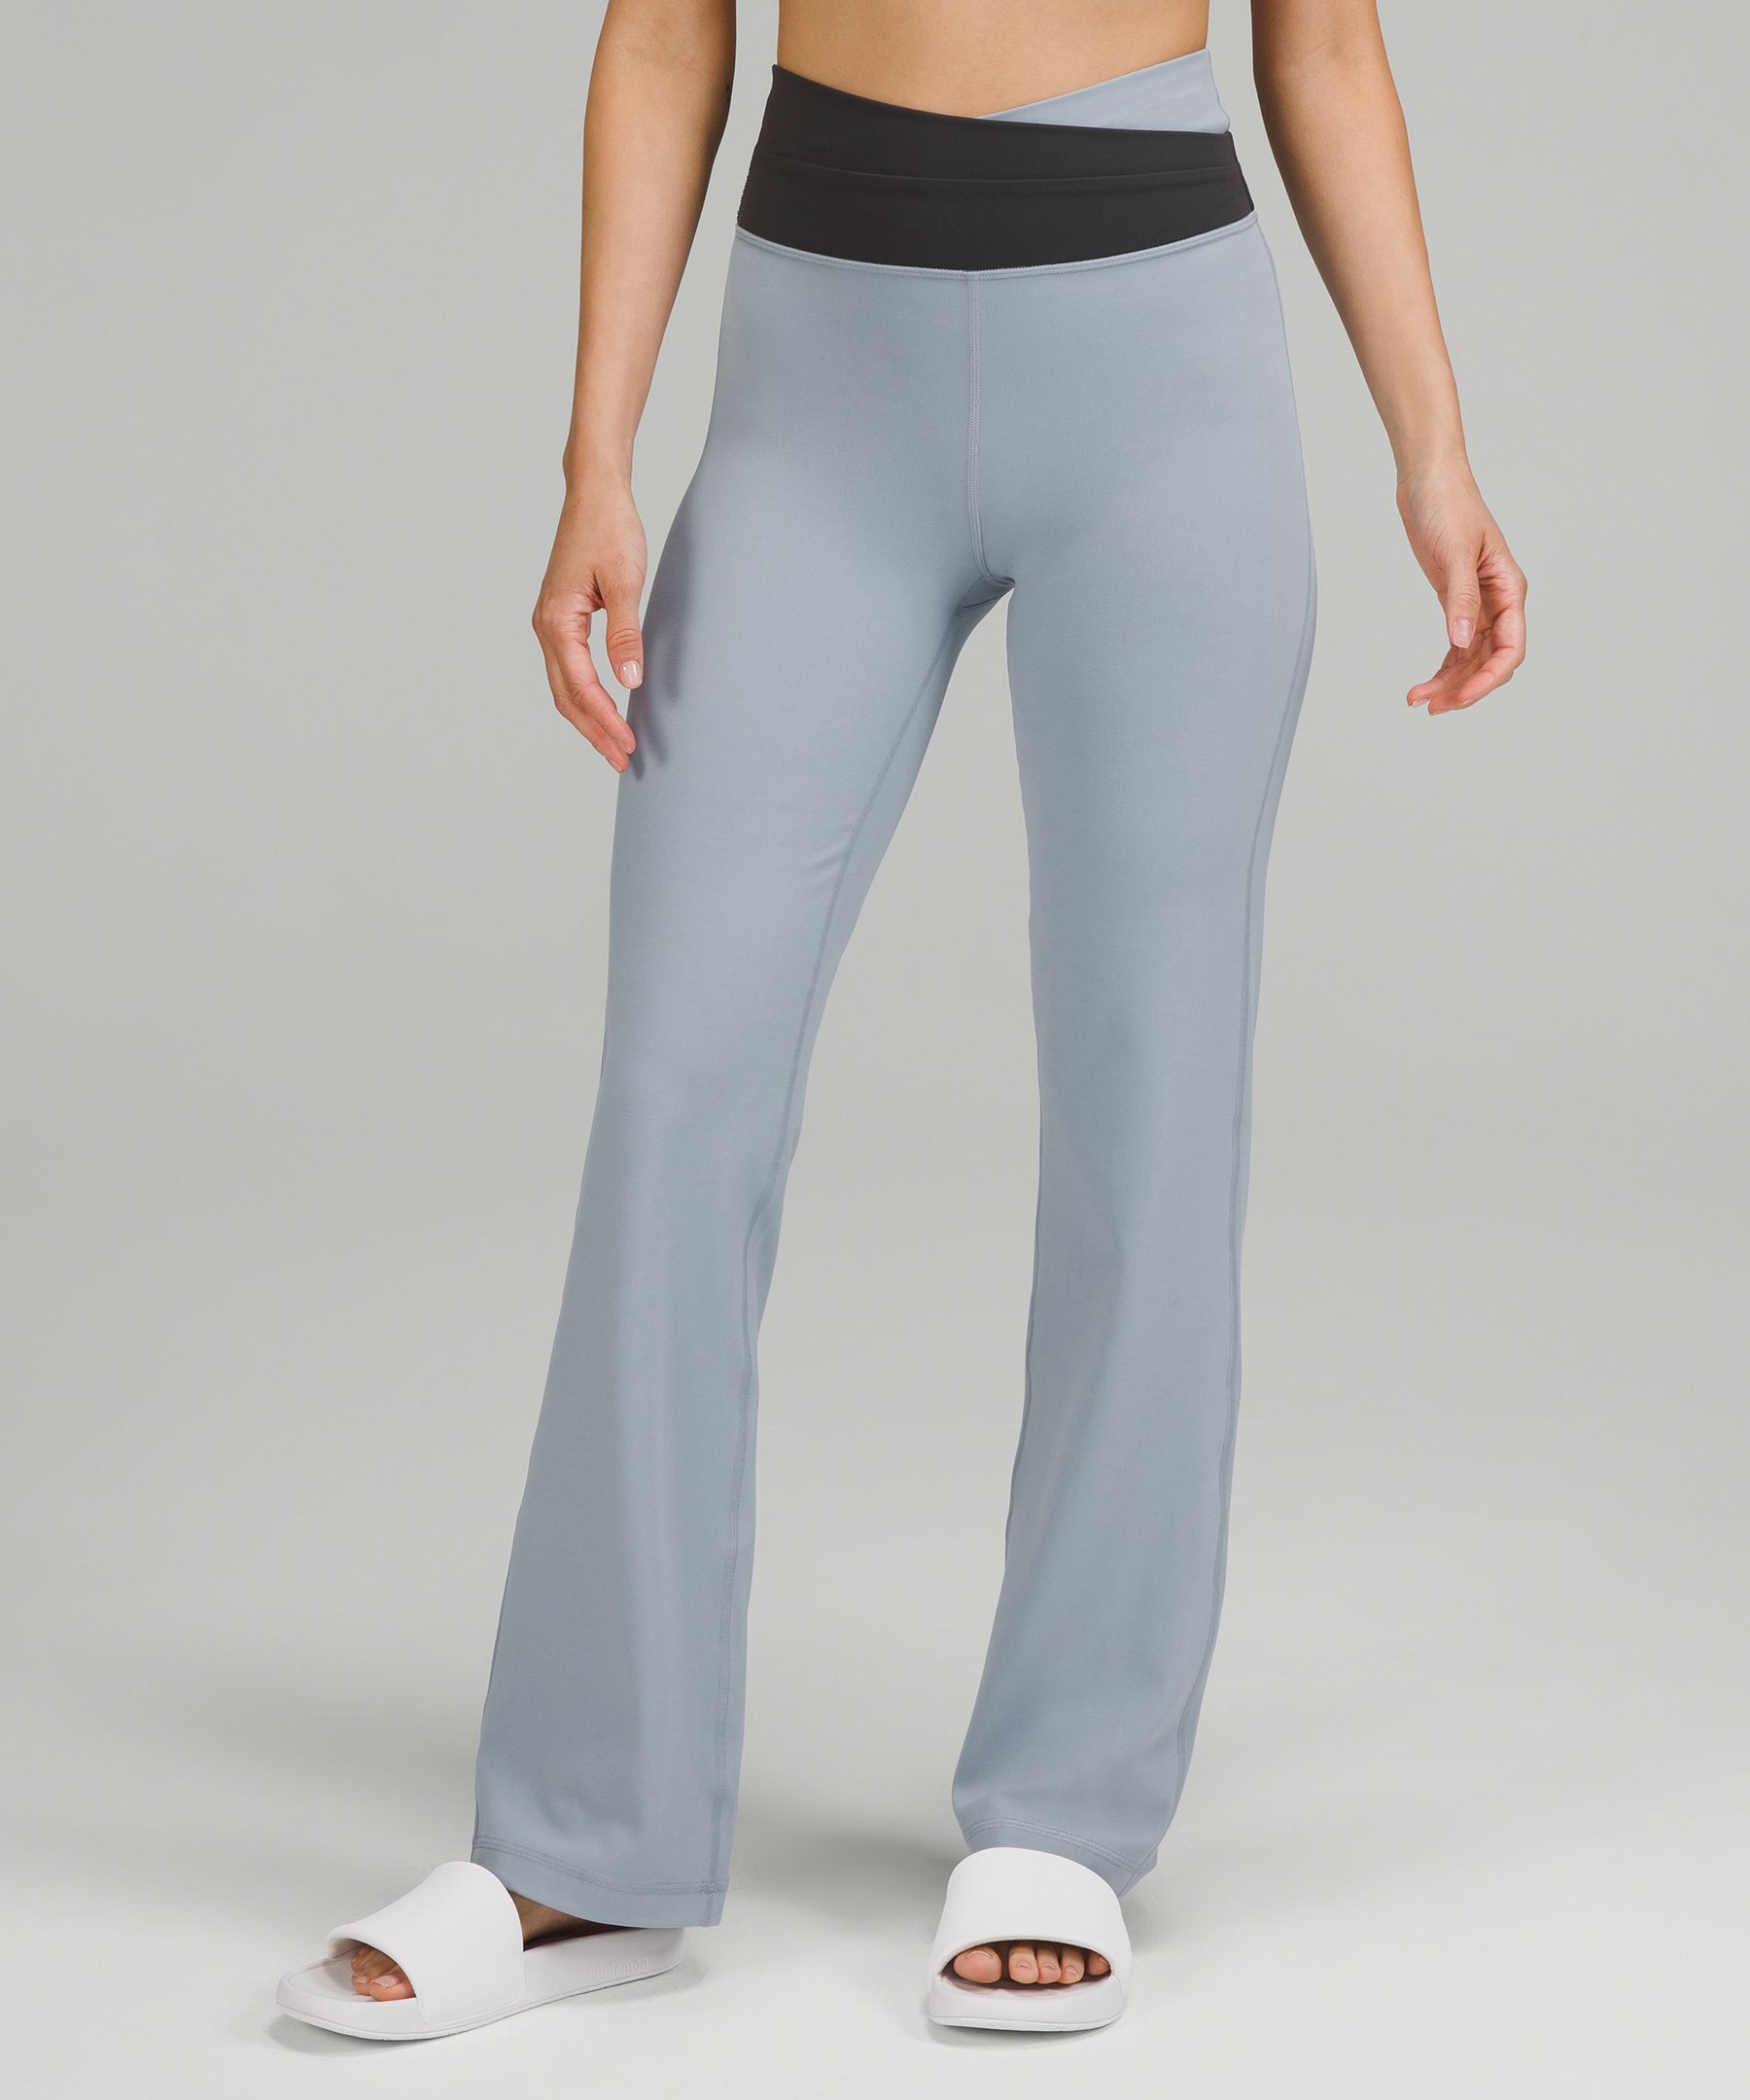 lululemon inspired work out wear Archives